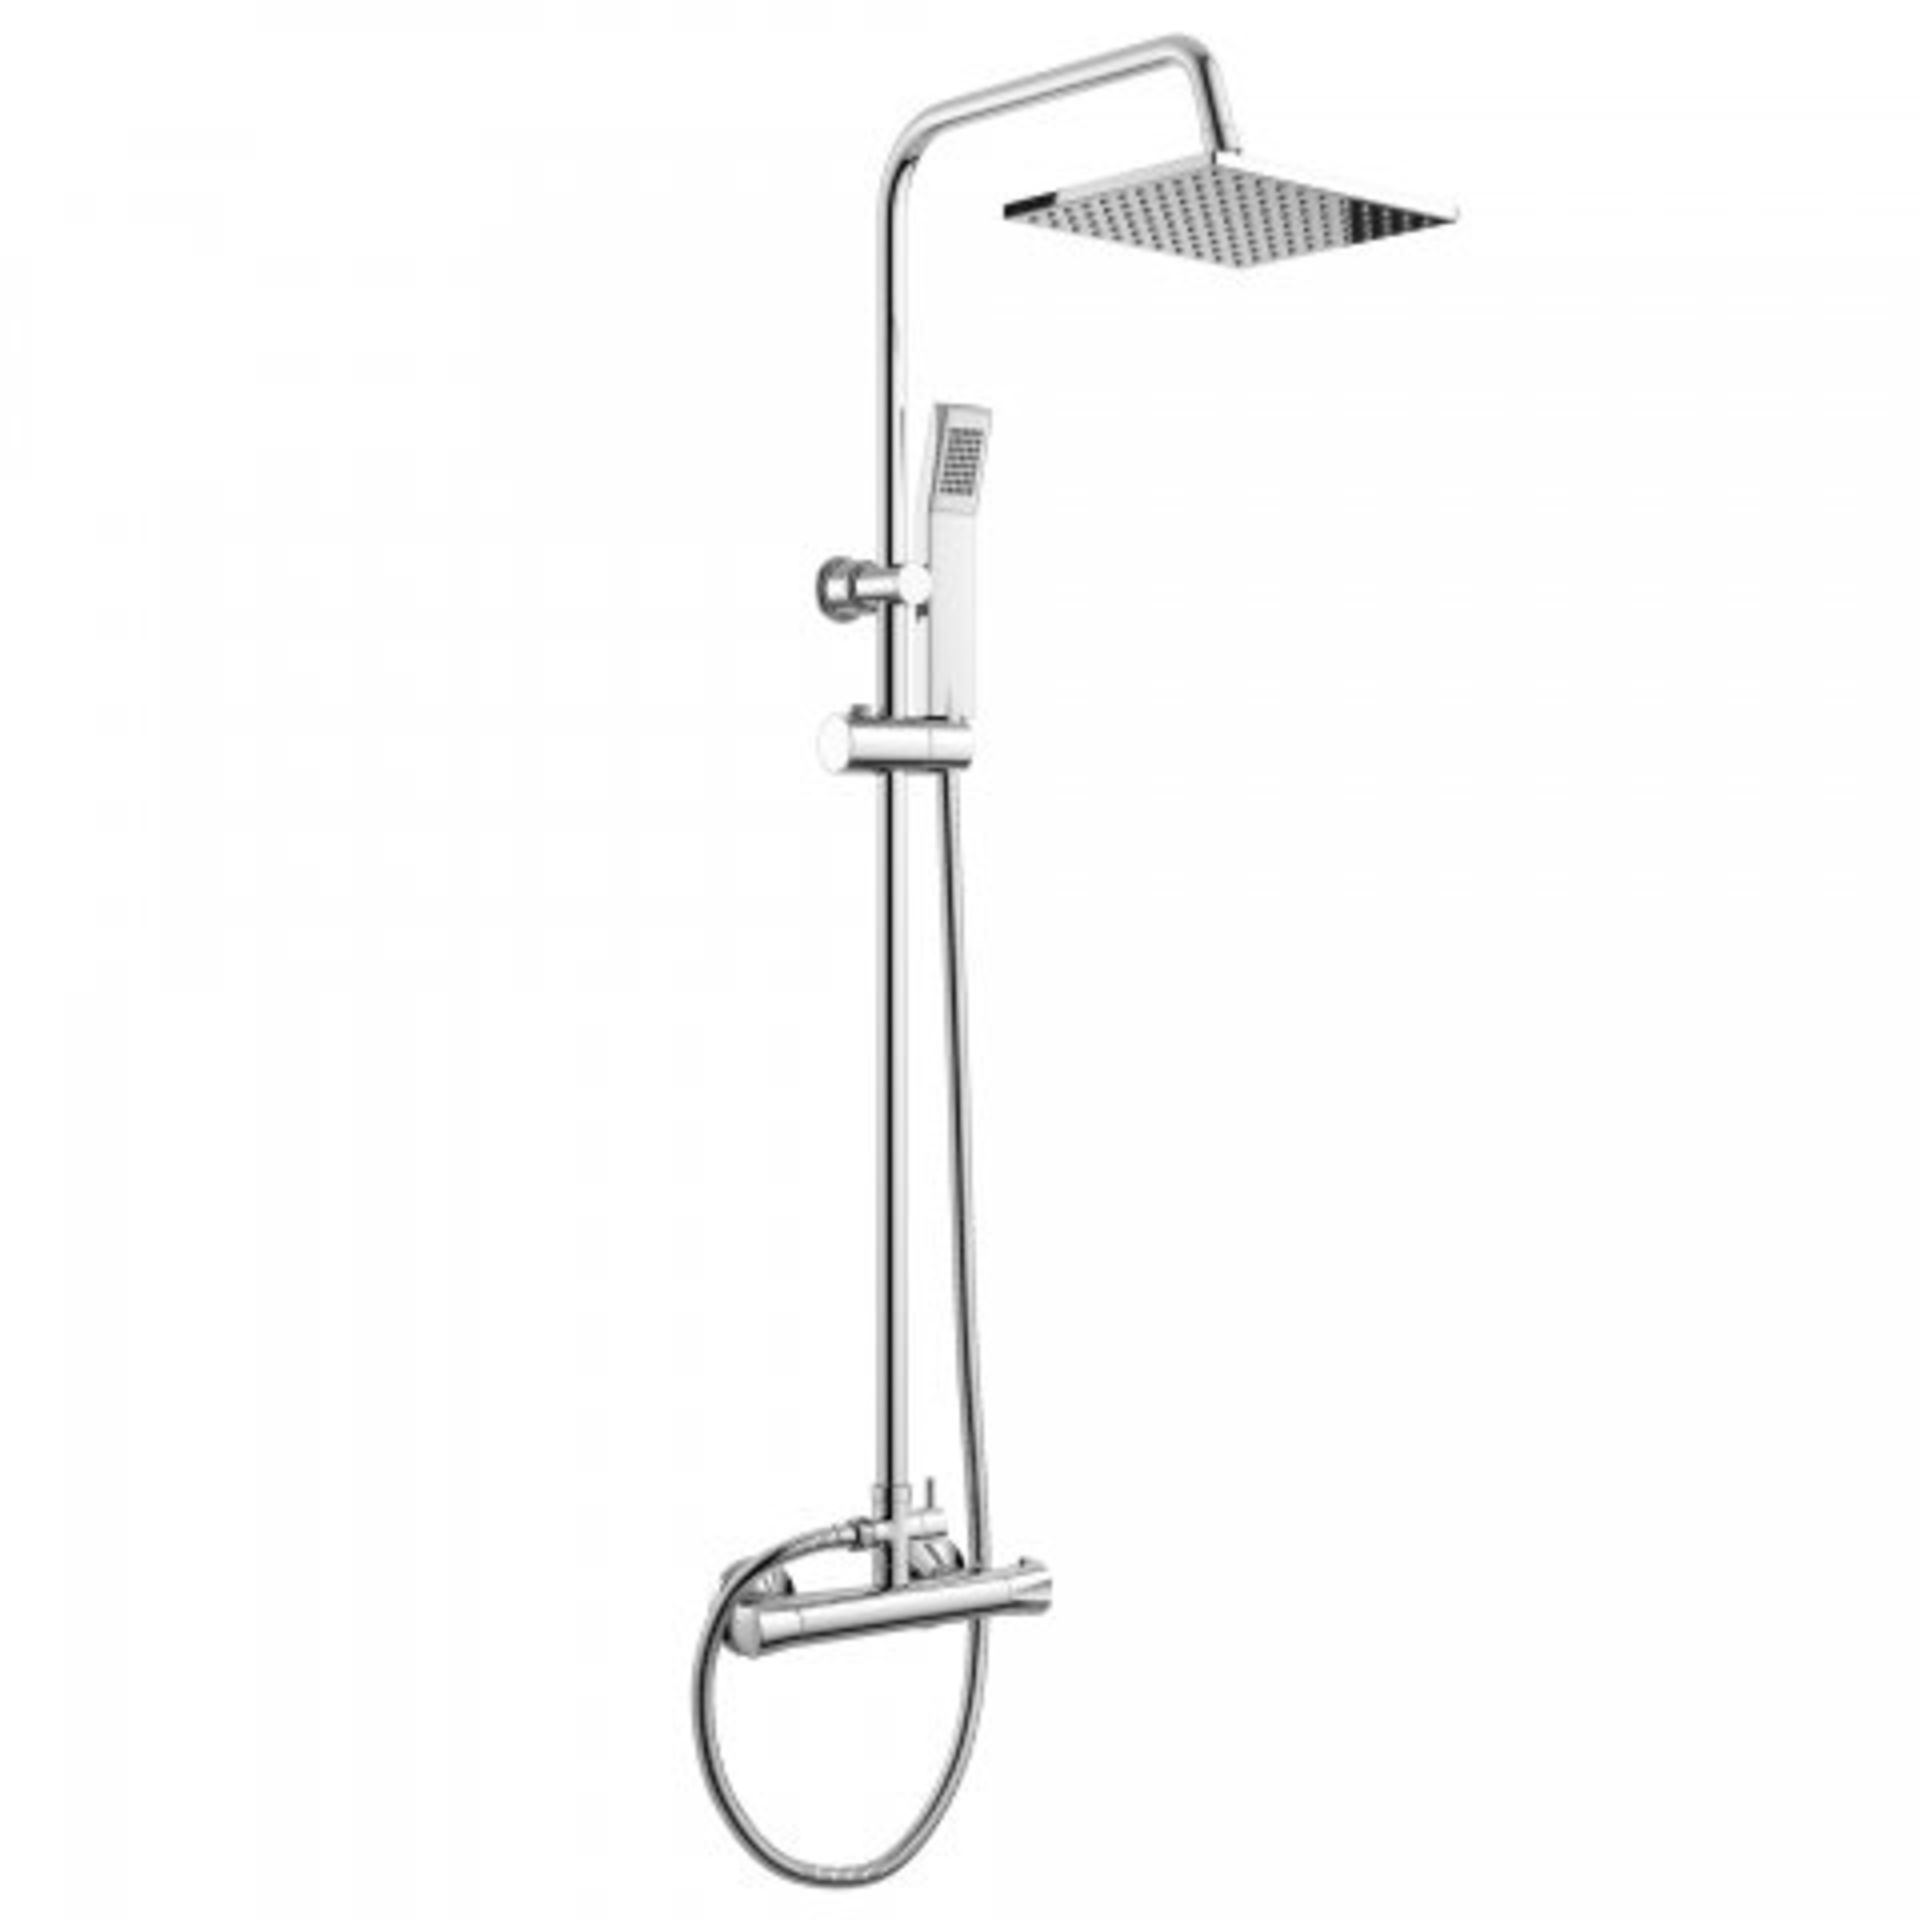 (O303) 200mm Square Head Thermostatic Exposed Shower Kit & Hand Held. RRP £249.99. Simplistic - Image 5 of 5